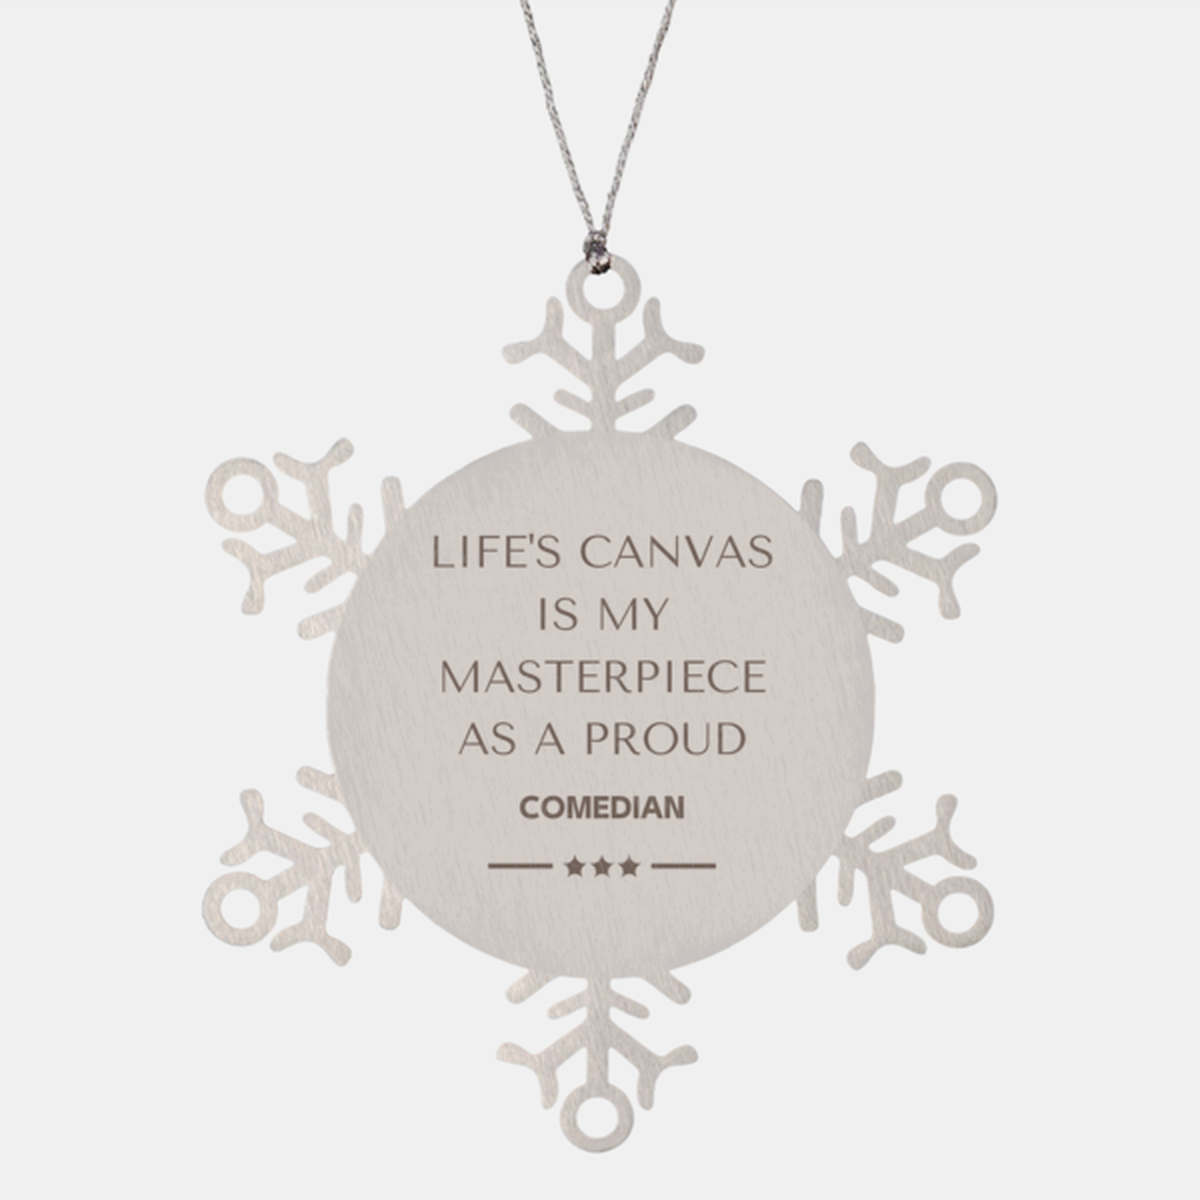 Proud Comedian Gifts, Life's canvas is my masterpiece, Epic Birthday Christmas Unique Snowflake Ornament For Comedian, Coworkers, Men, Women, Friends